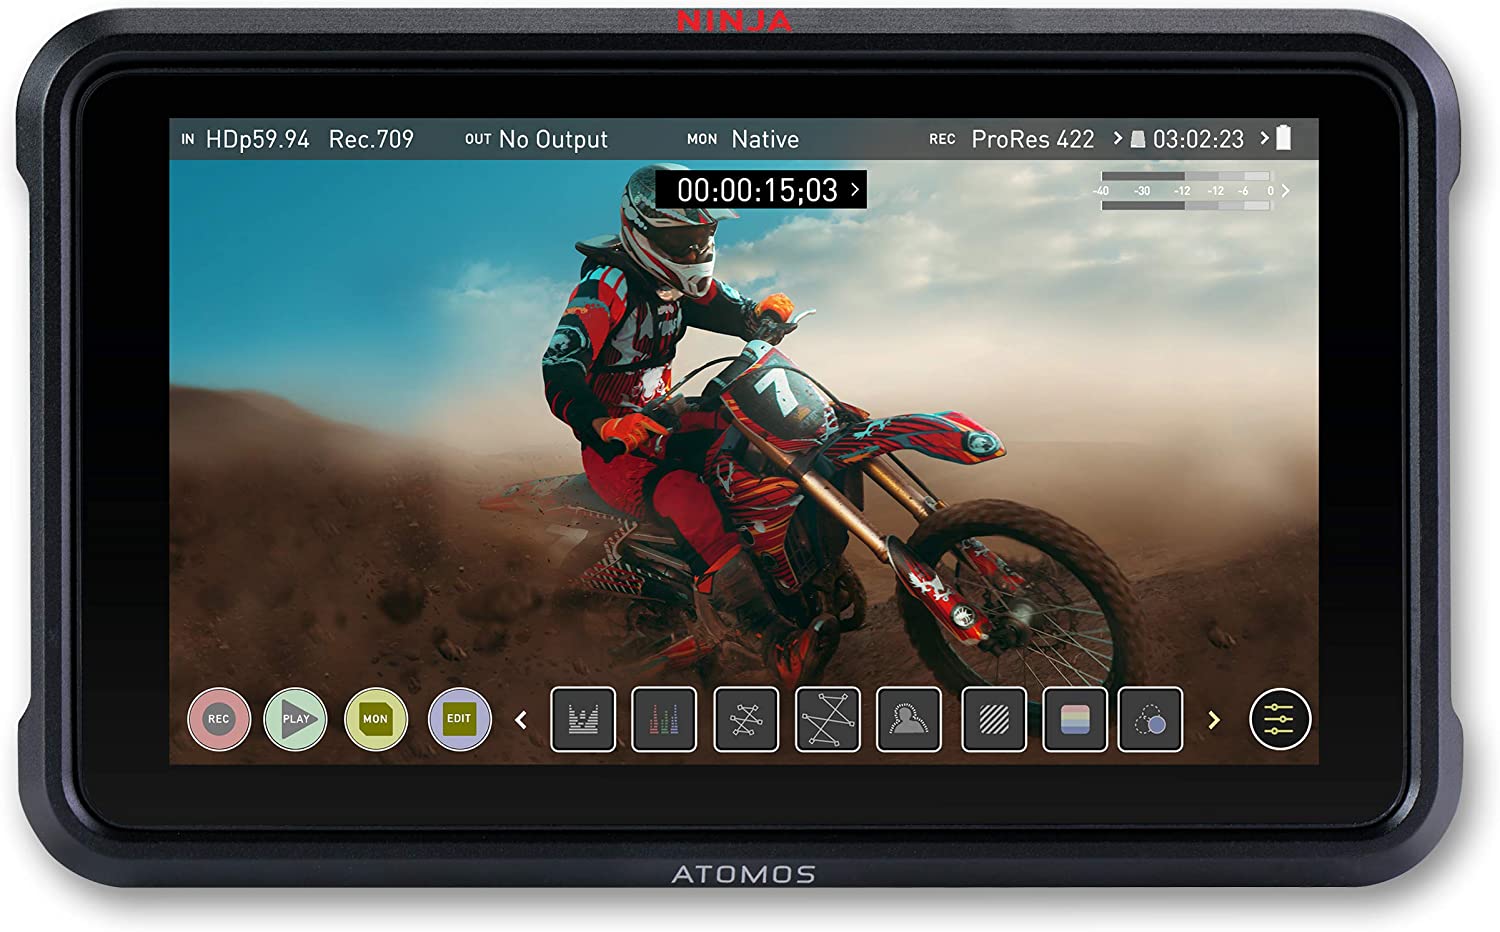 Atomos Ninja V Accessories, Save Money With These